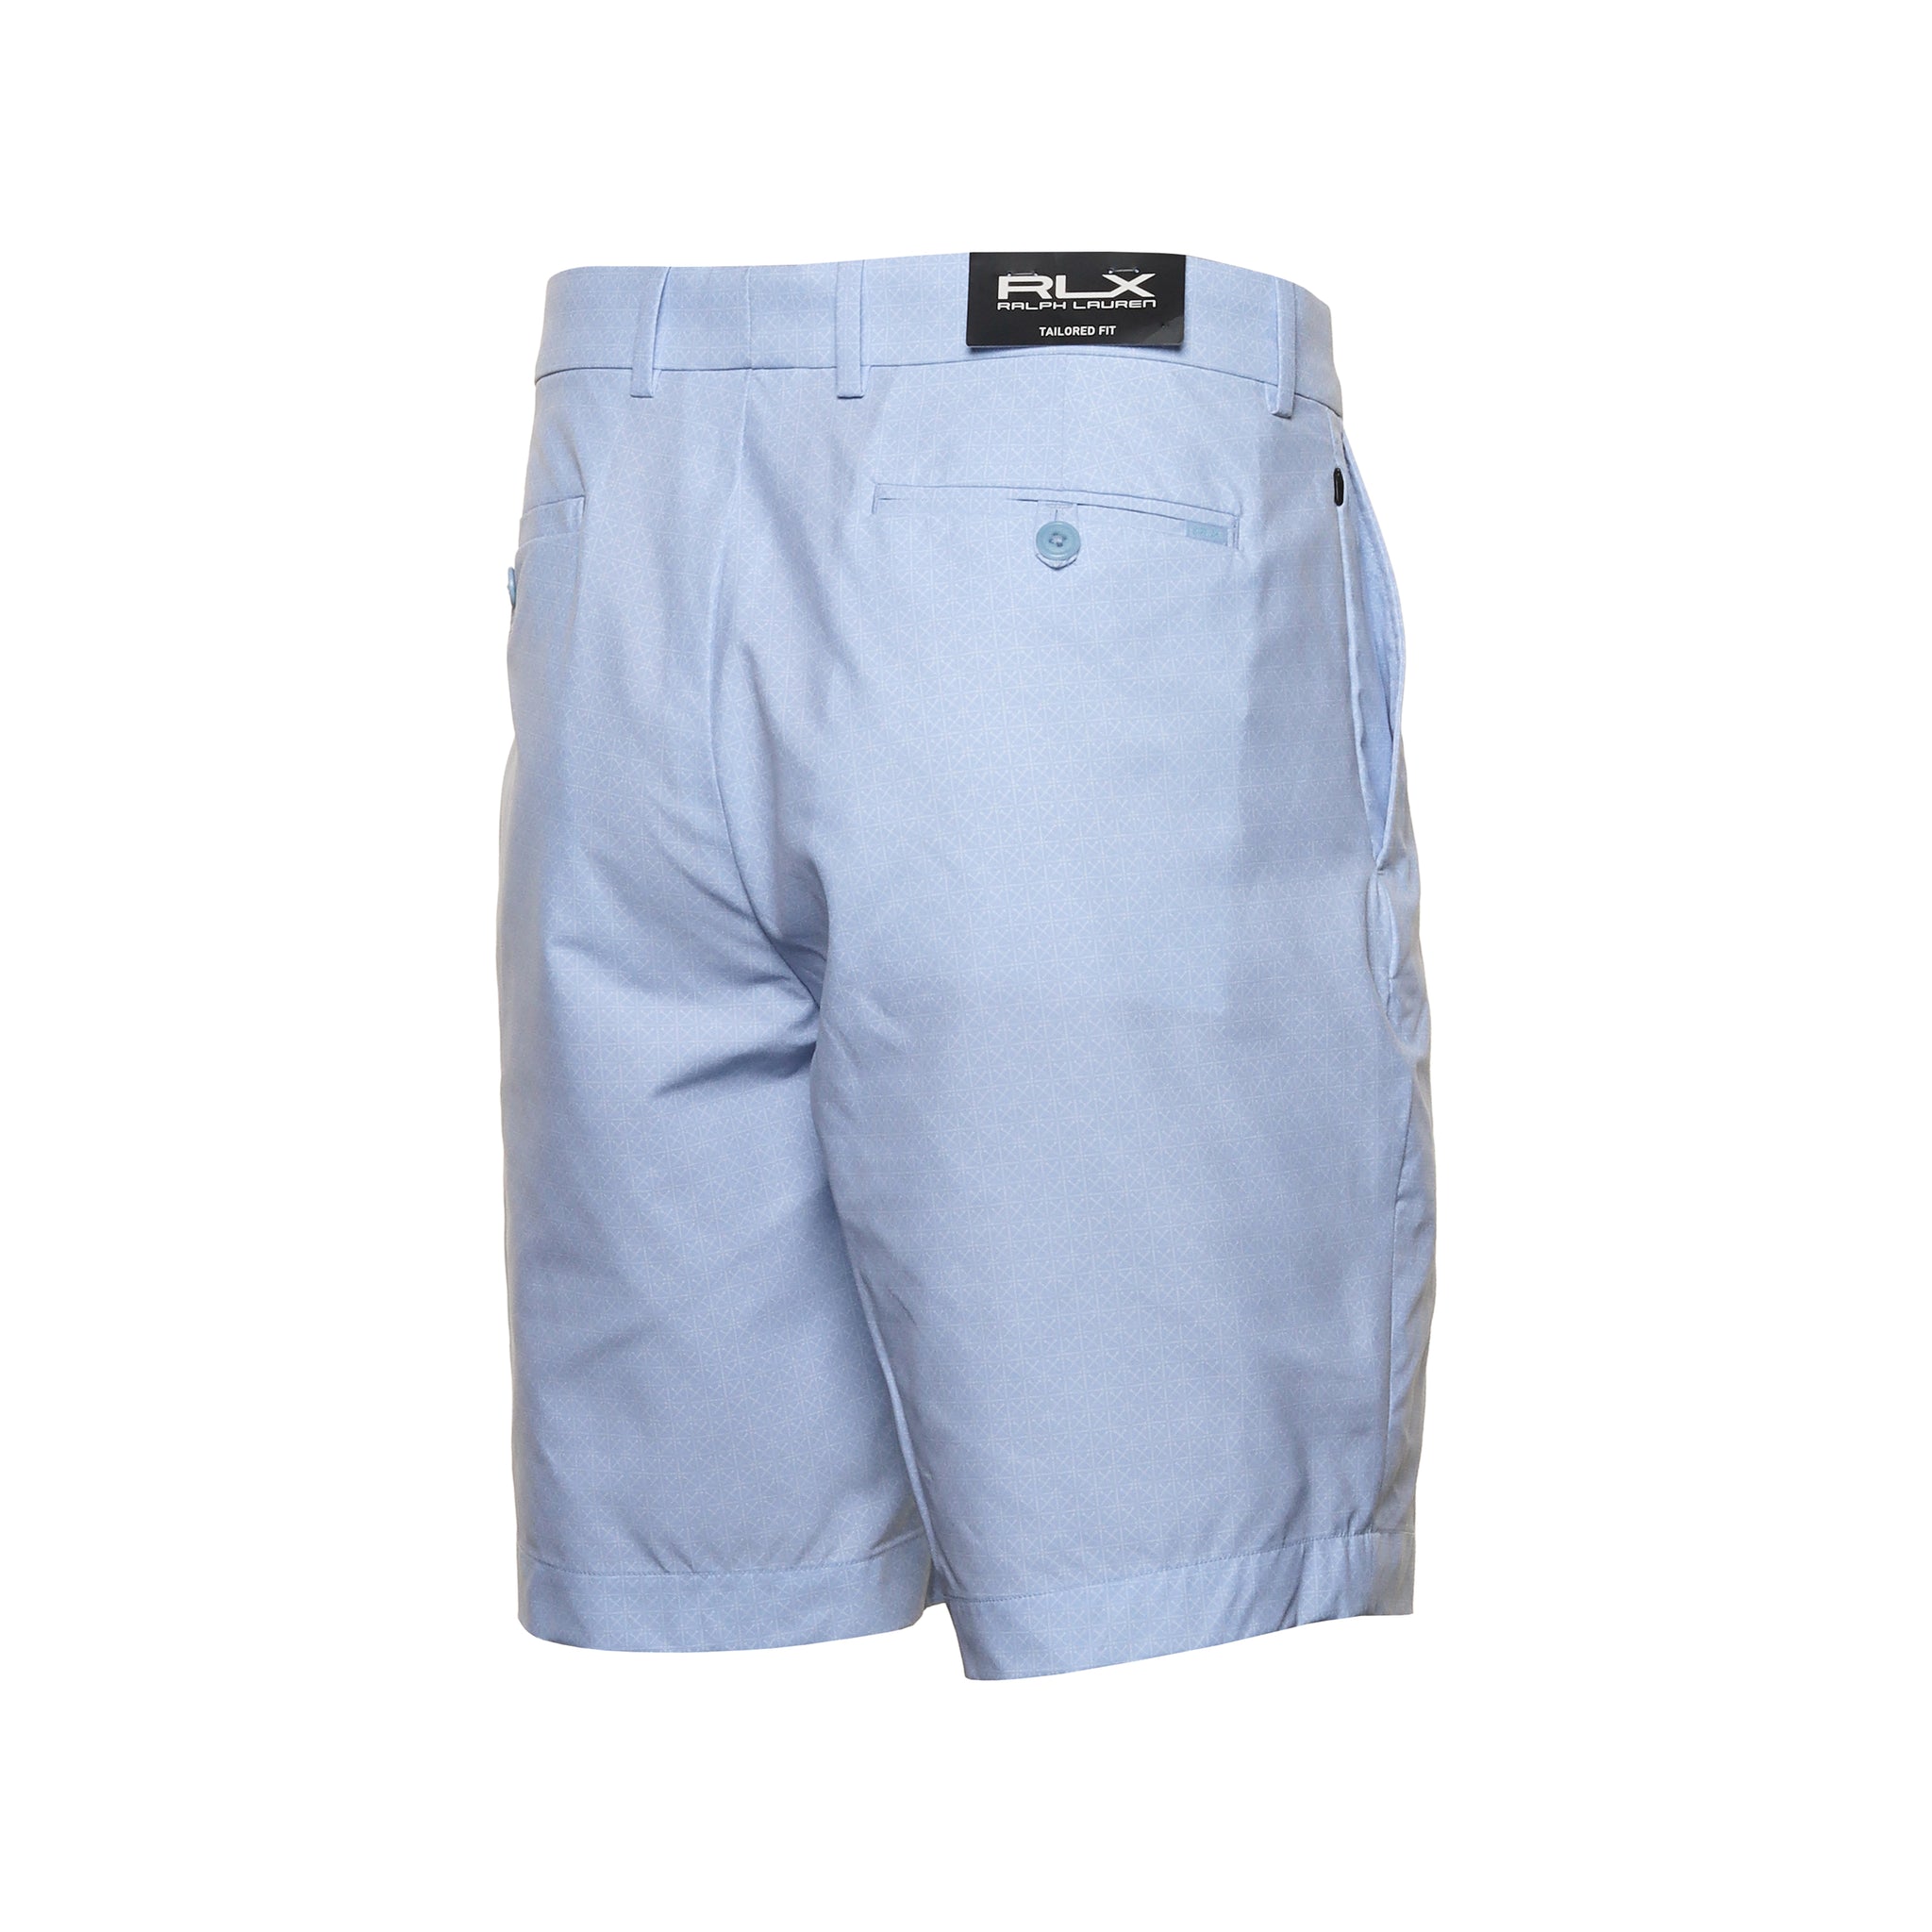 rlx-ralph-lauren-stretch-tailored-fit-shorts-785934327-office-blue-tee-tile-001